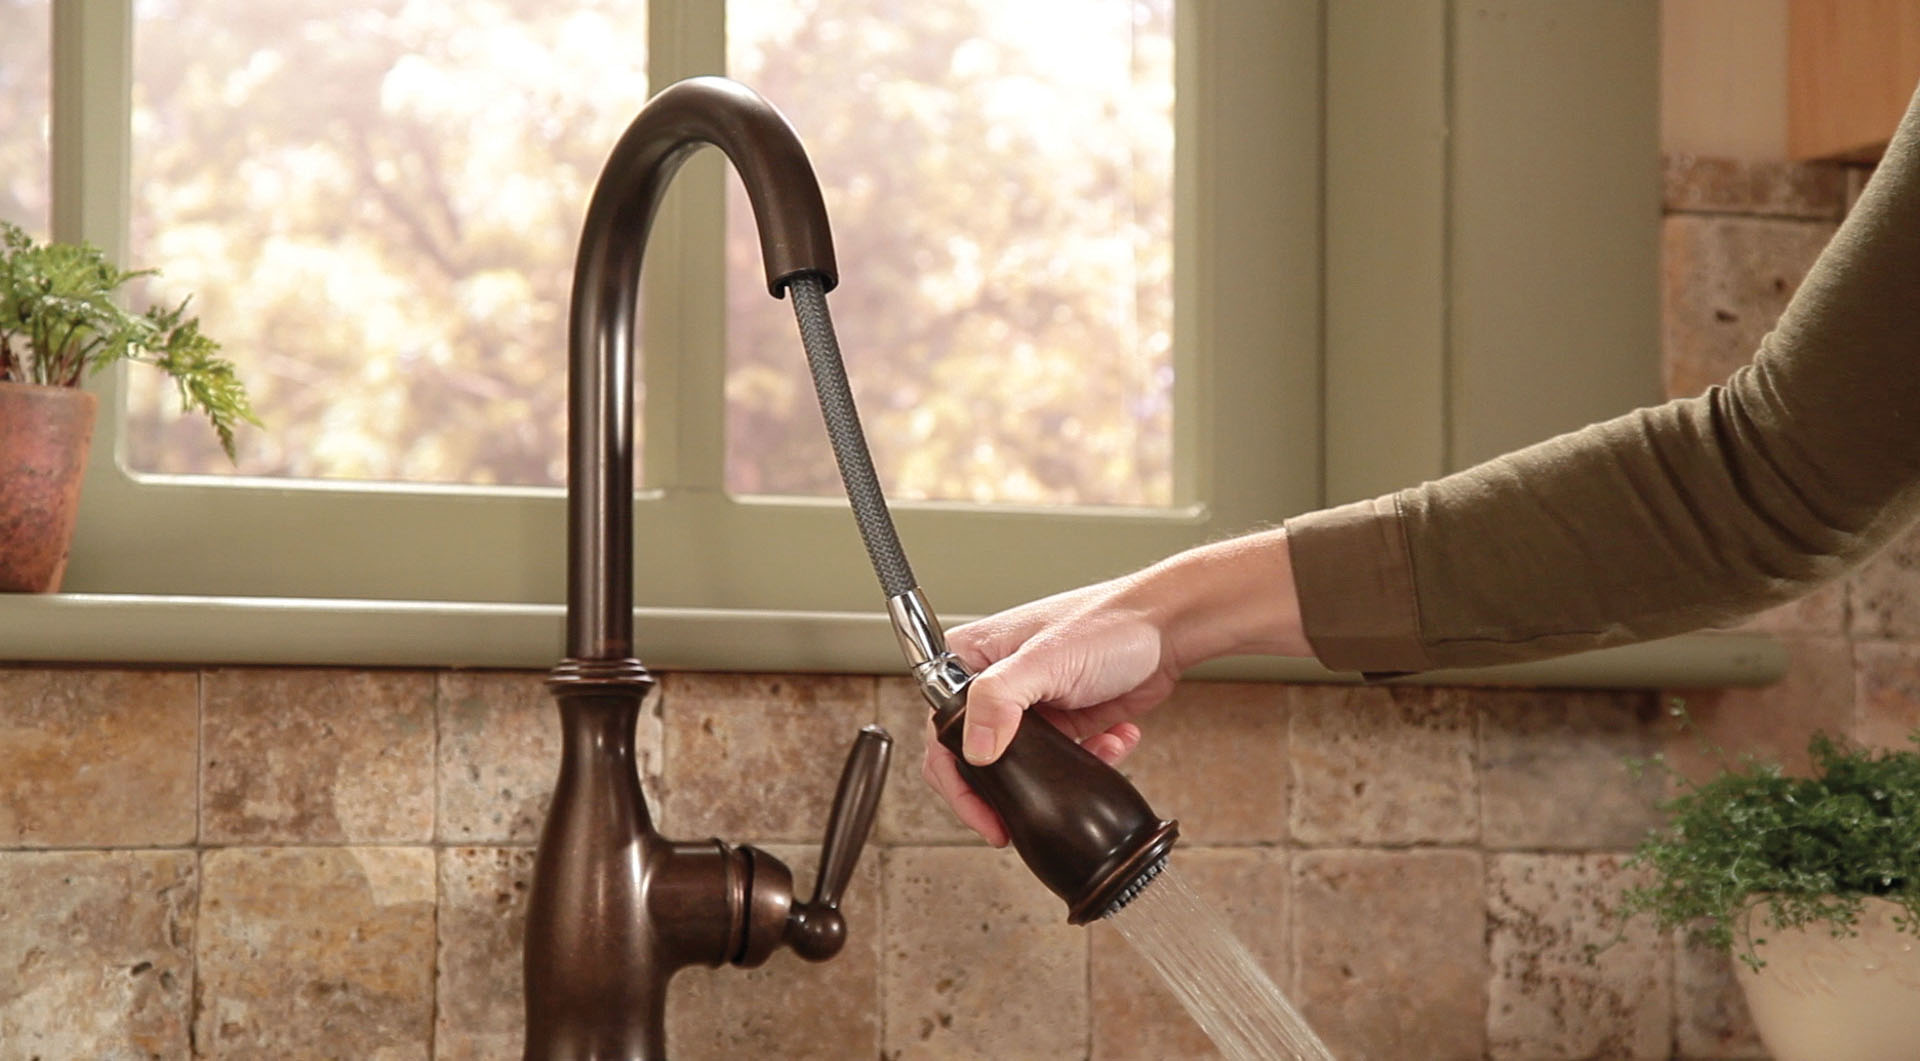 Moen Perfects The Kitchen Pulldown Faucet Experience With Thoughtful Design And Meaningful Innovation